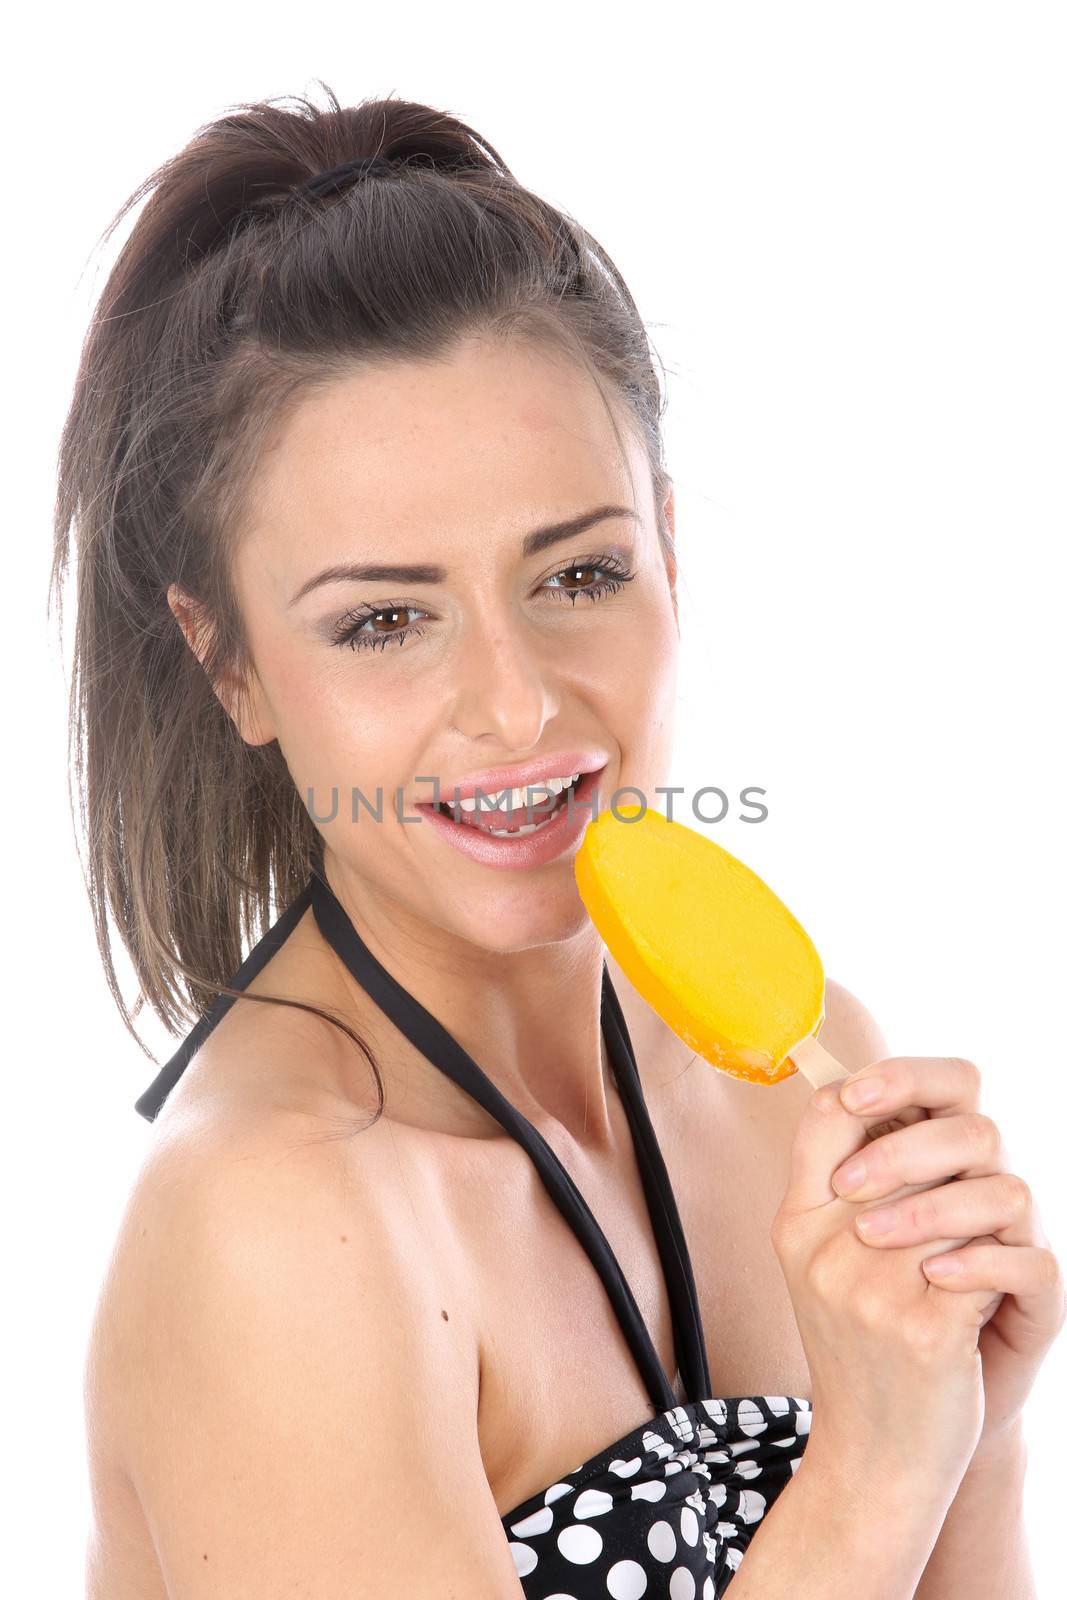 Model Released. Woman Eating Ice lolly by Whiteboxmedia